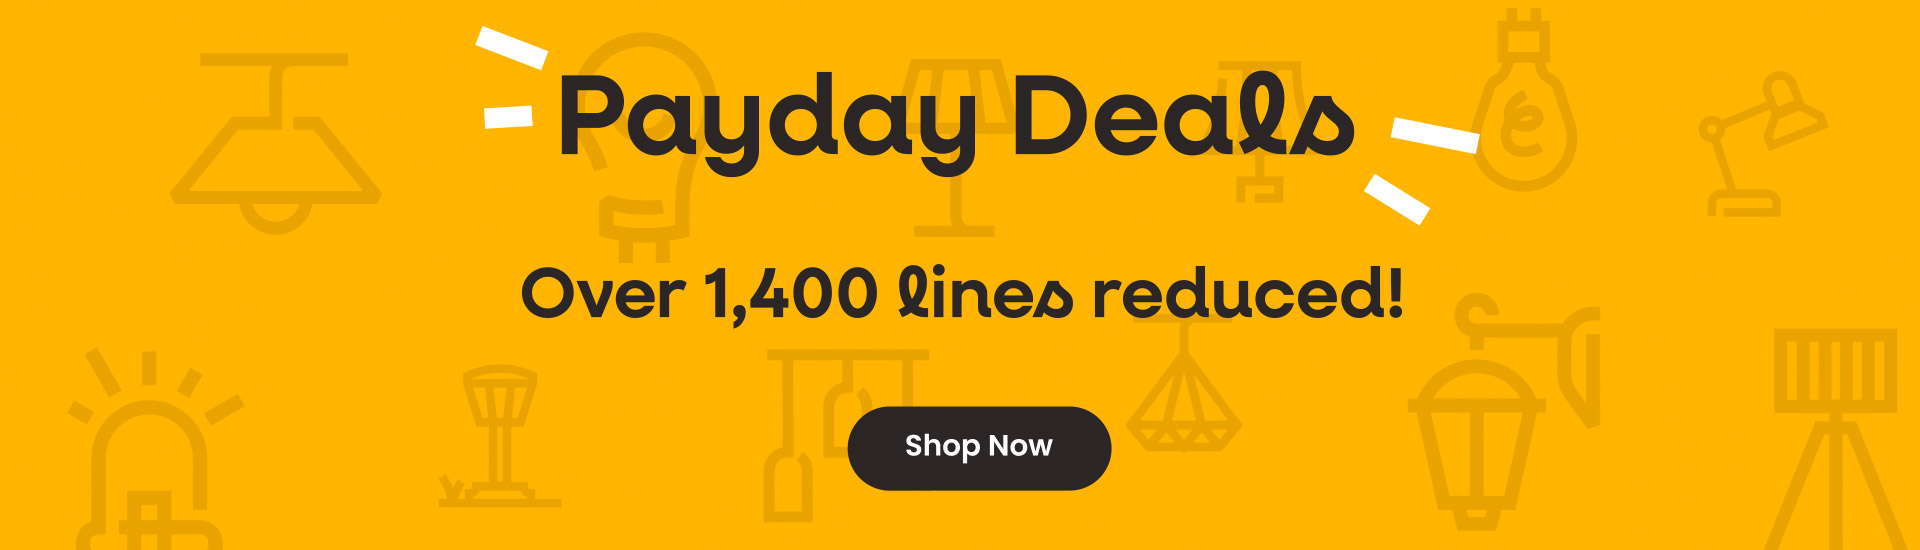 Payday deals